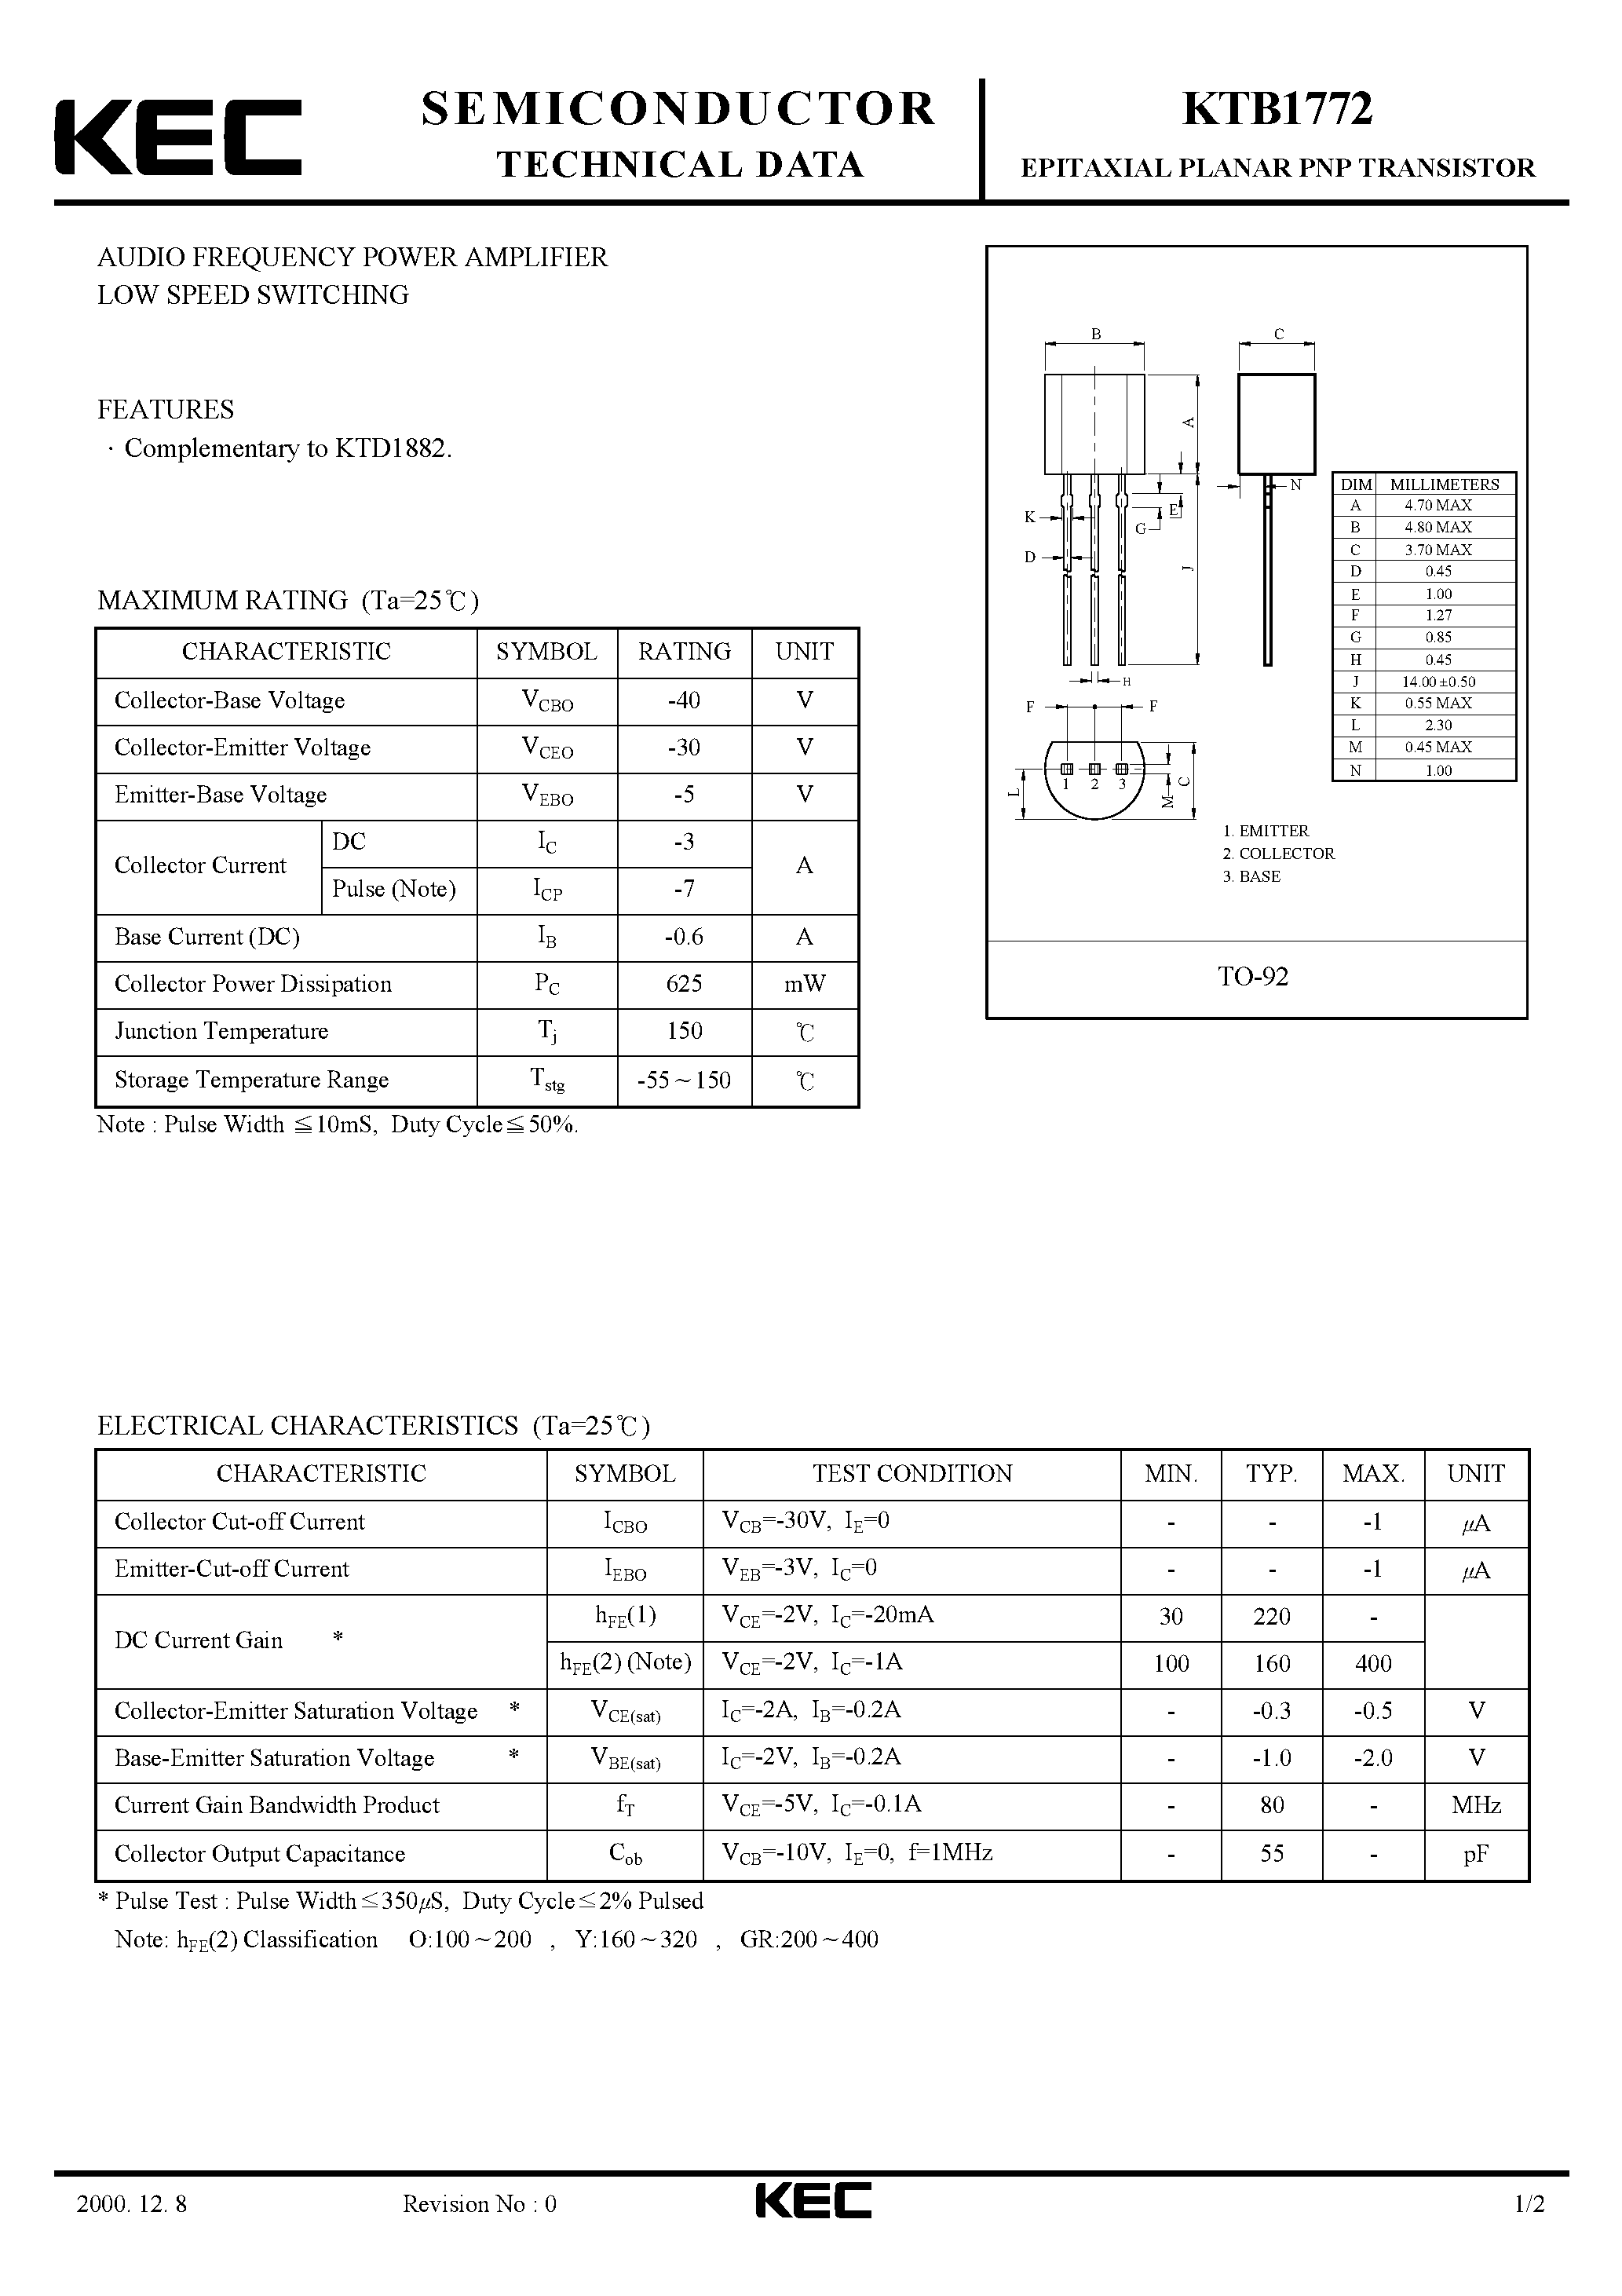 Даташит KTB1772 - EPITAXIAL PLANAR PNP TRANSISTOR (AUDIO FREQUENCY POWER AMPLIFIER LOW SPEED SWITCHING) страница 1